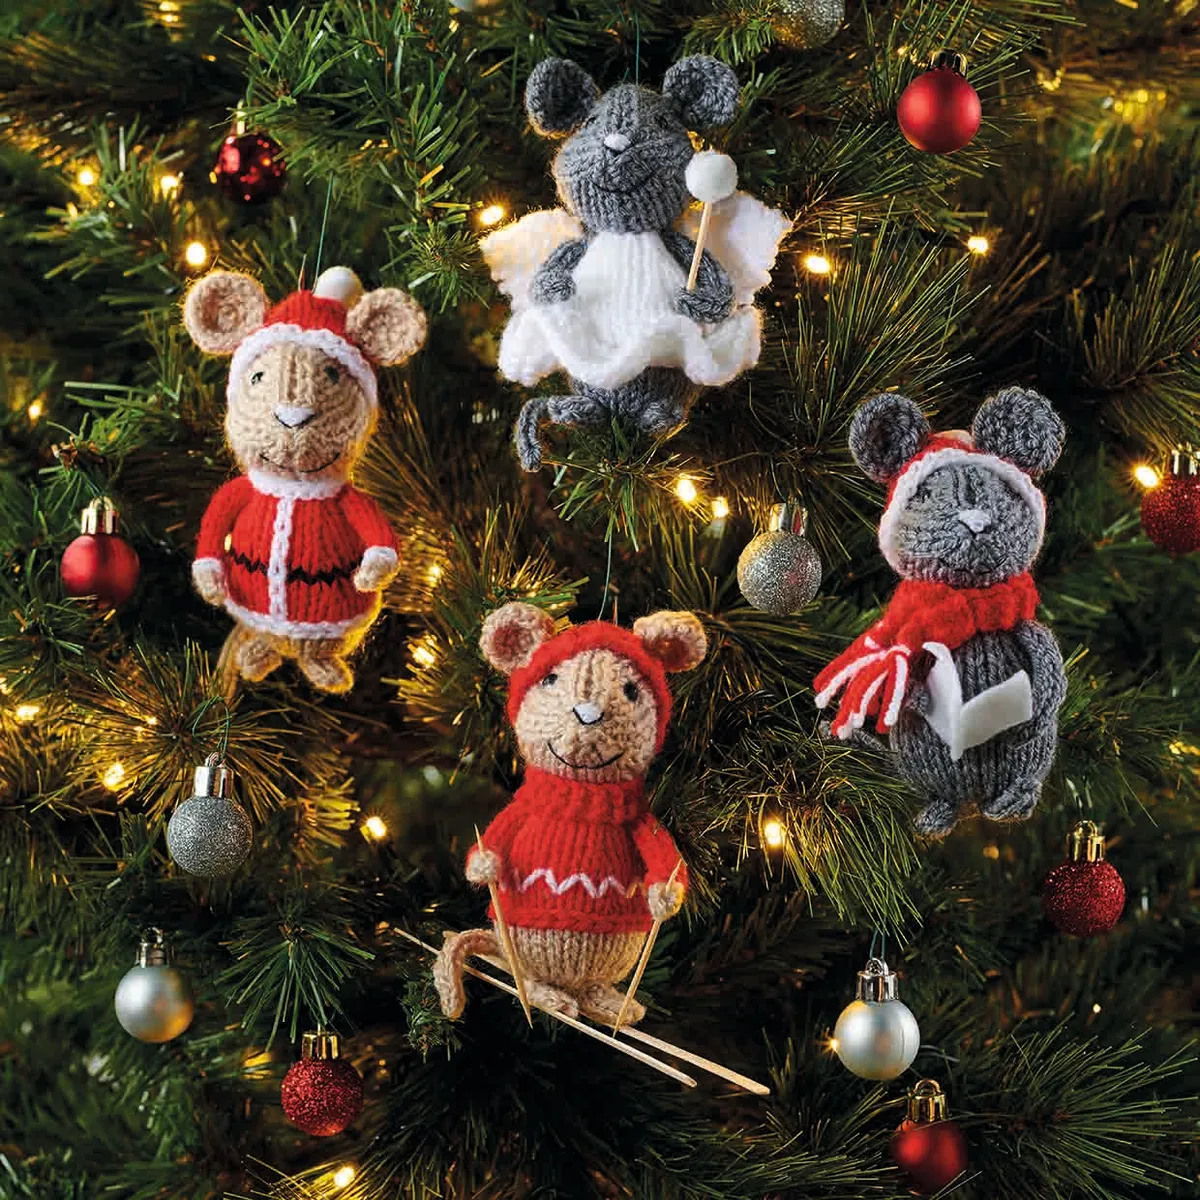 This is a full portrait picture showing all 4 christmas mice hanging from a tree decked with fairy lights and silver and red glitter baubles